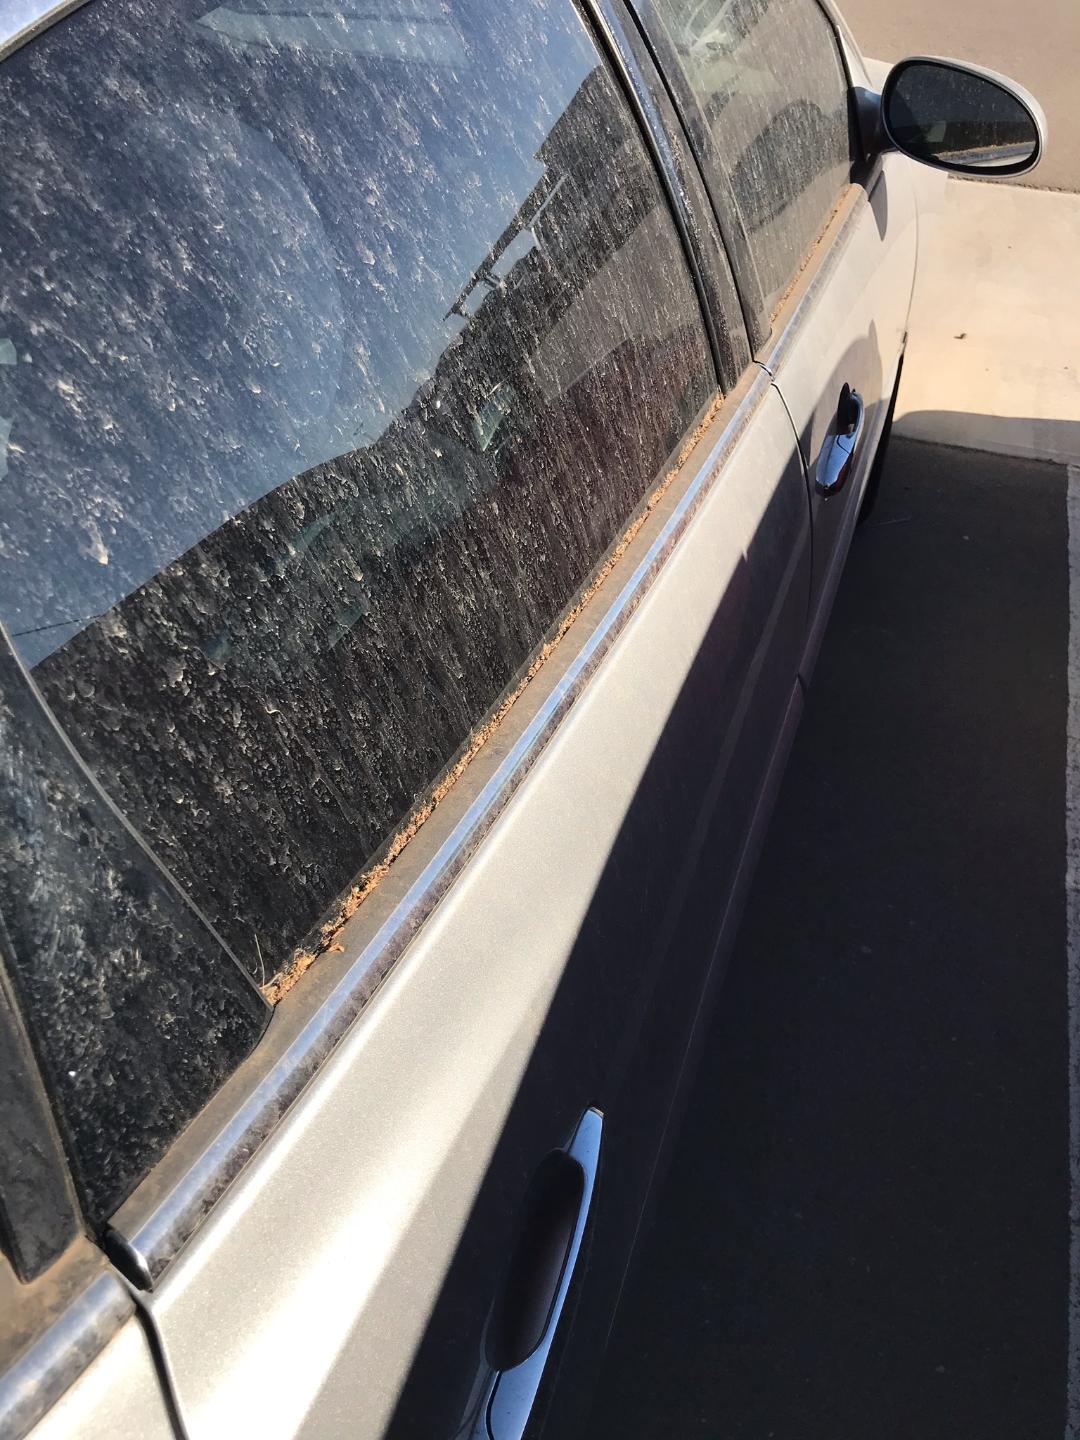 Entire vehicle filthy in dealer yard